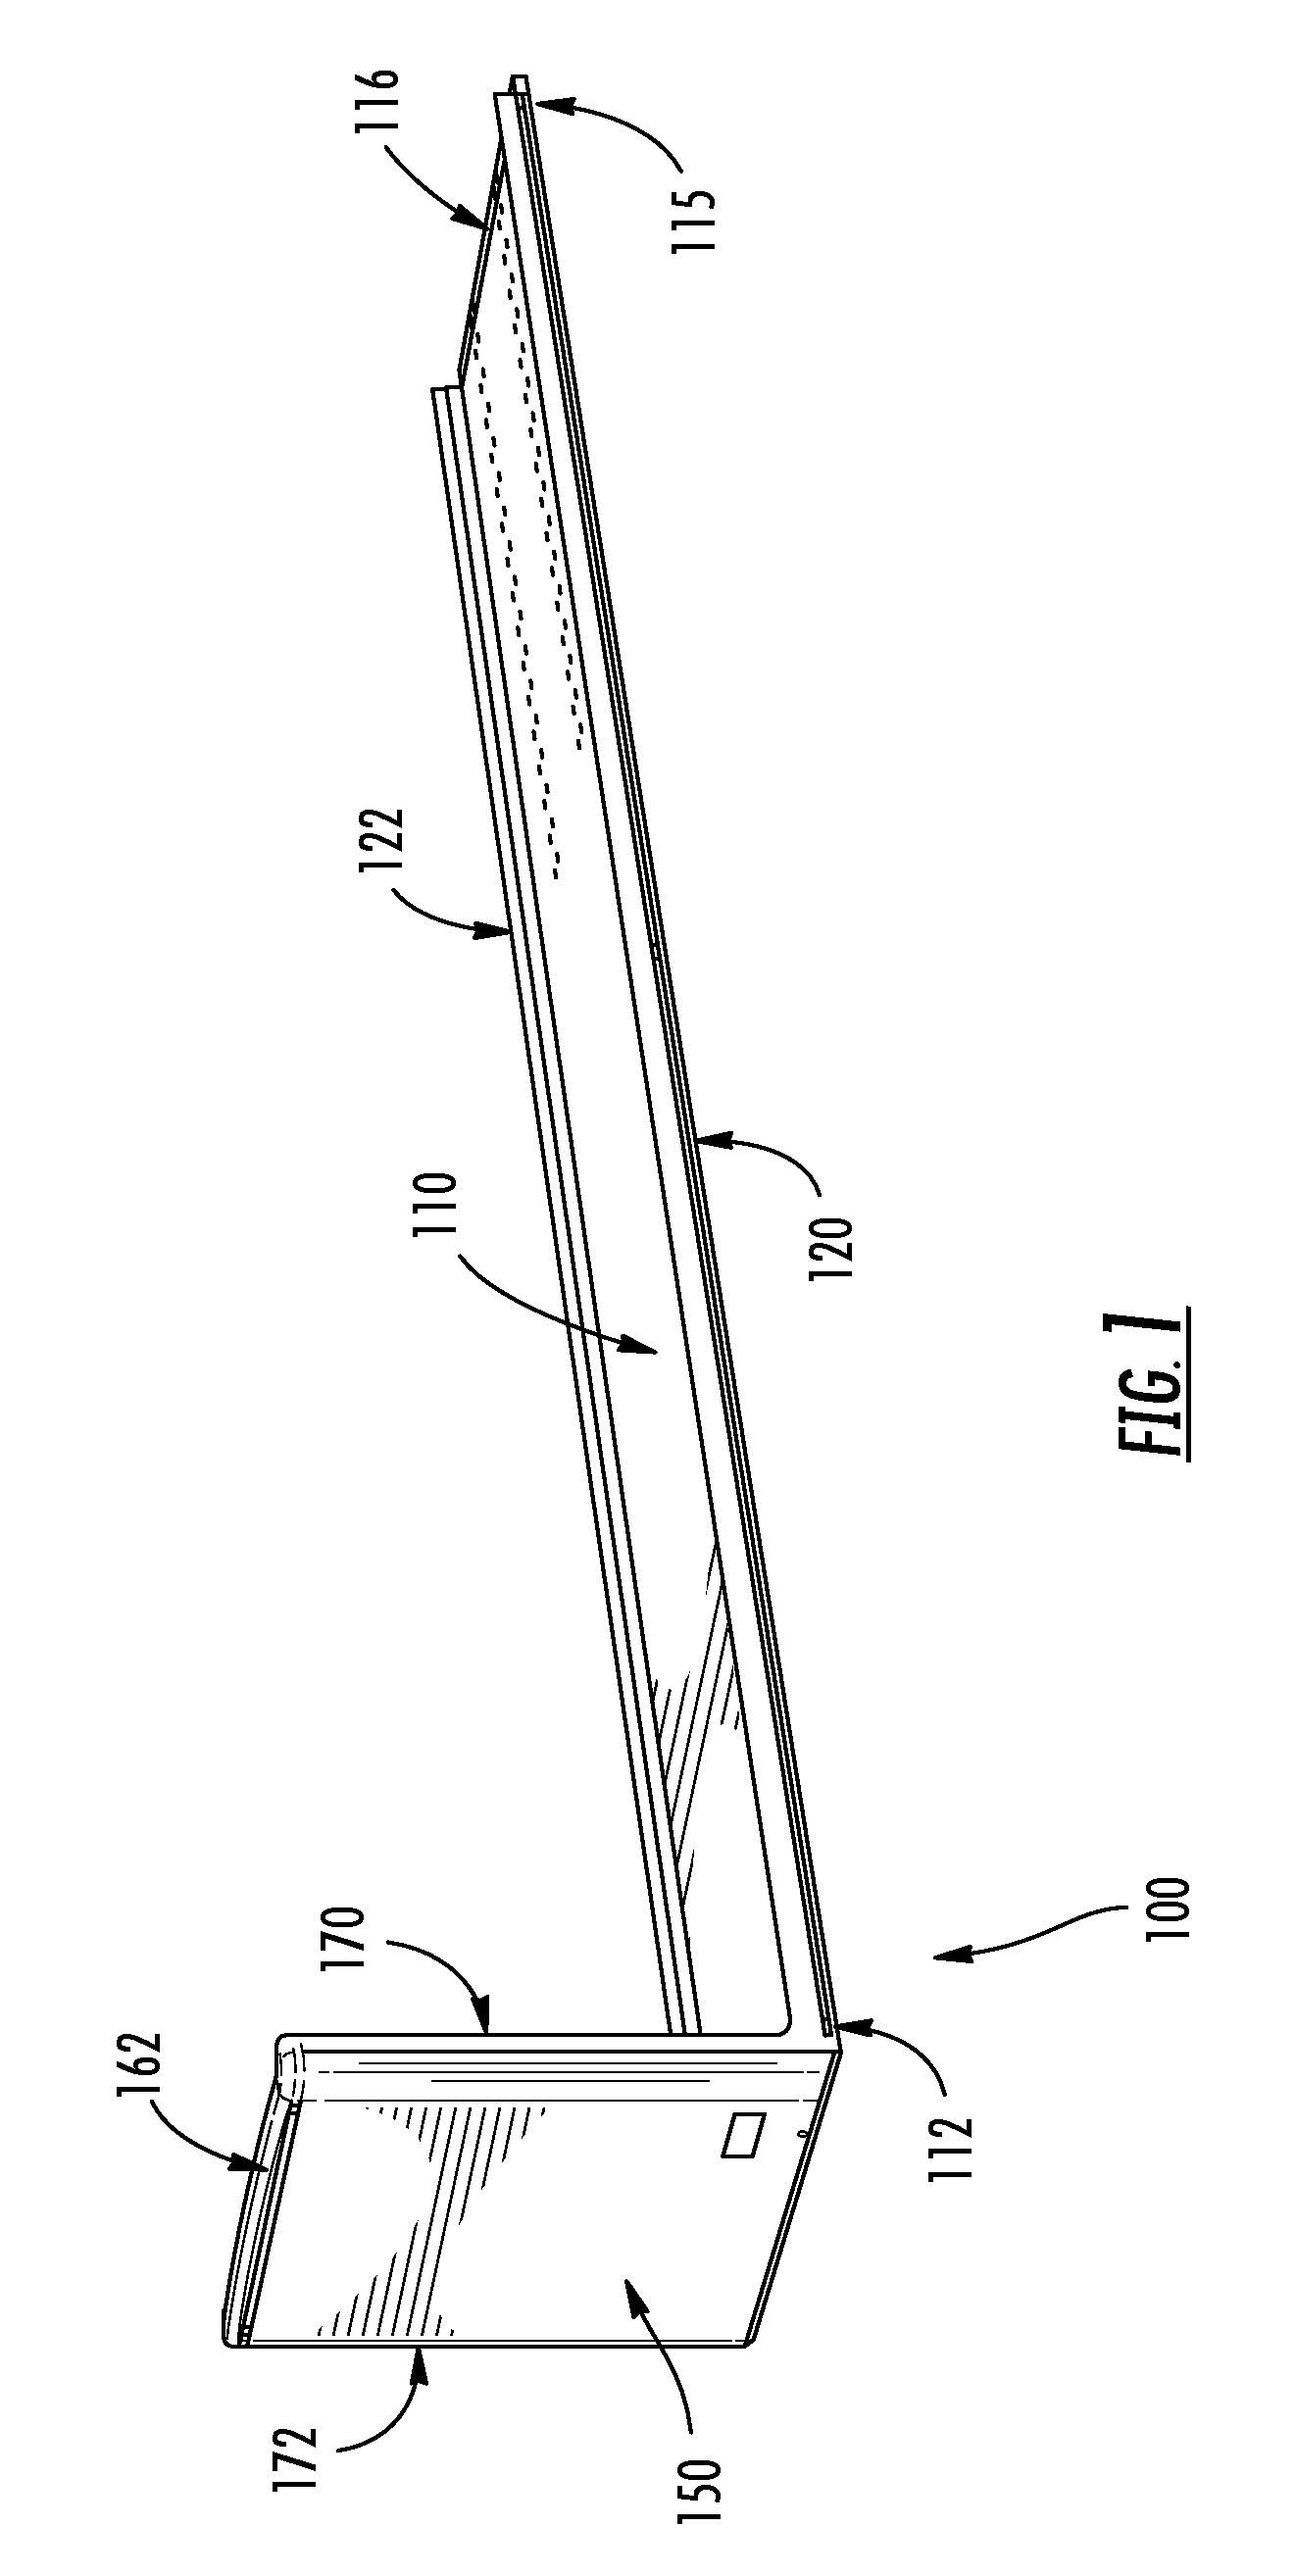 Modular composite structural component and structures formed therewith